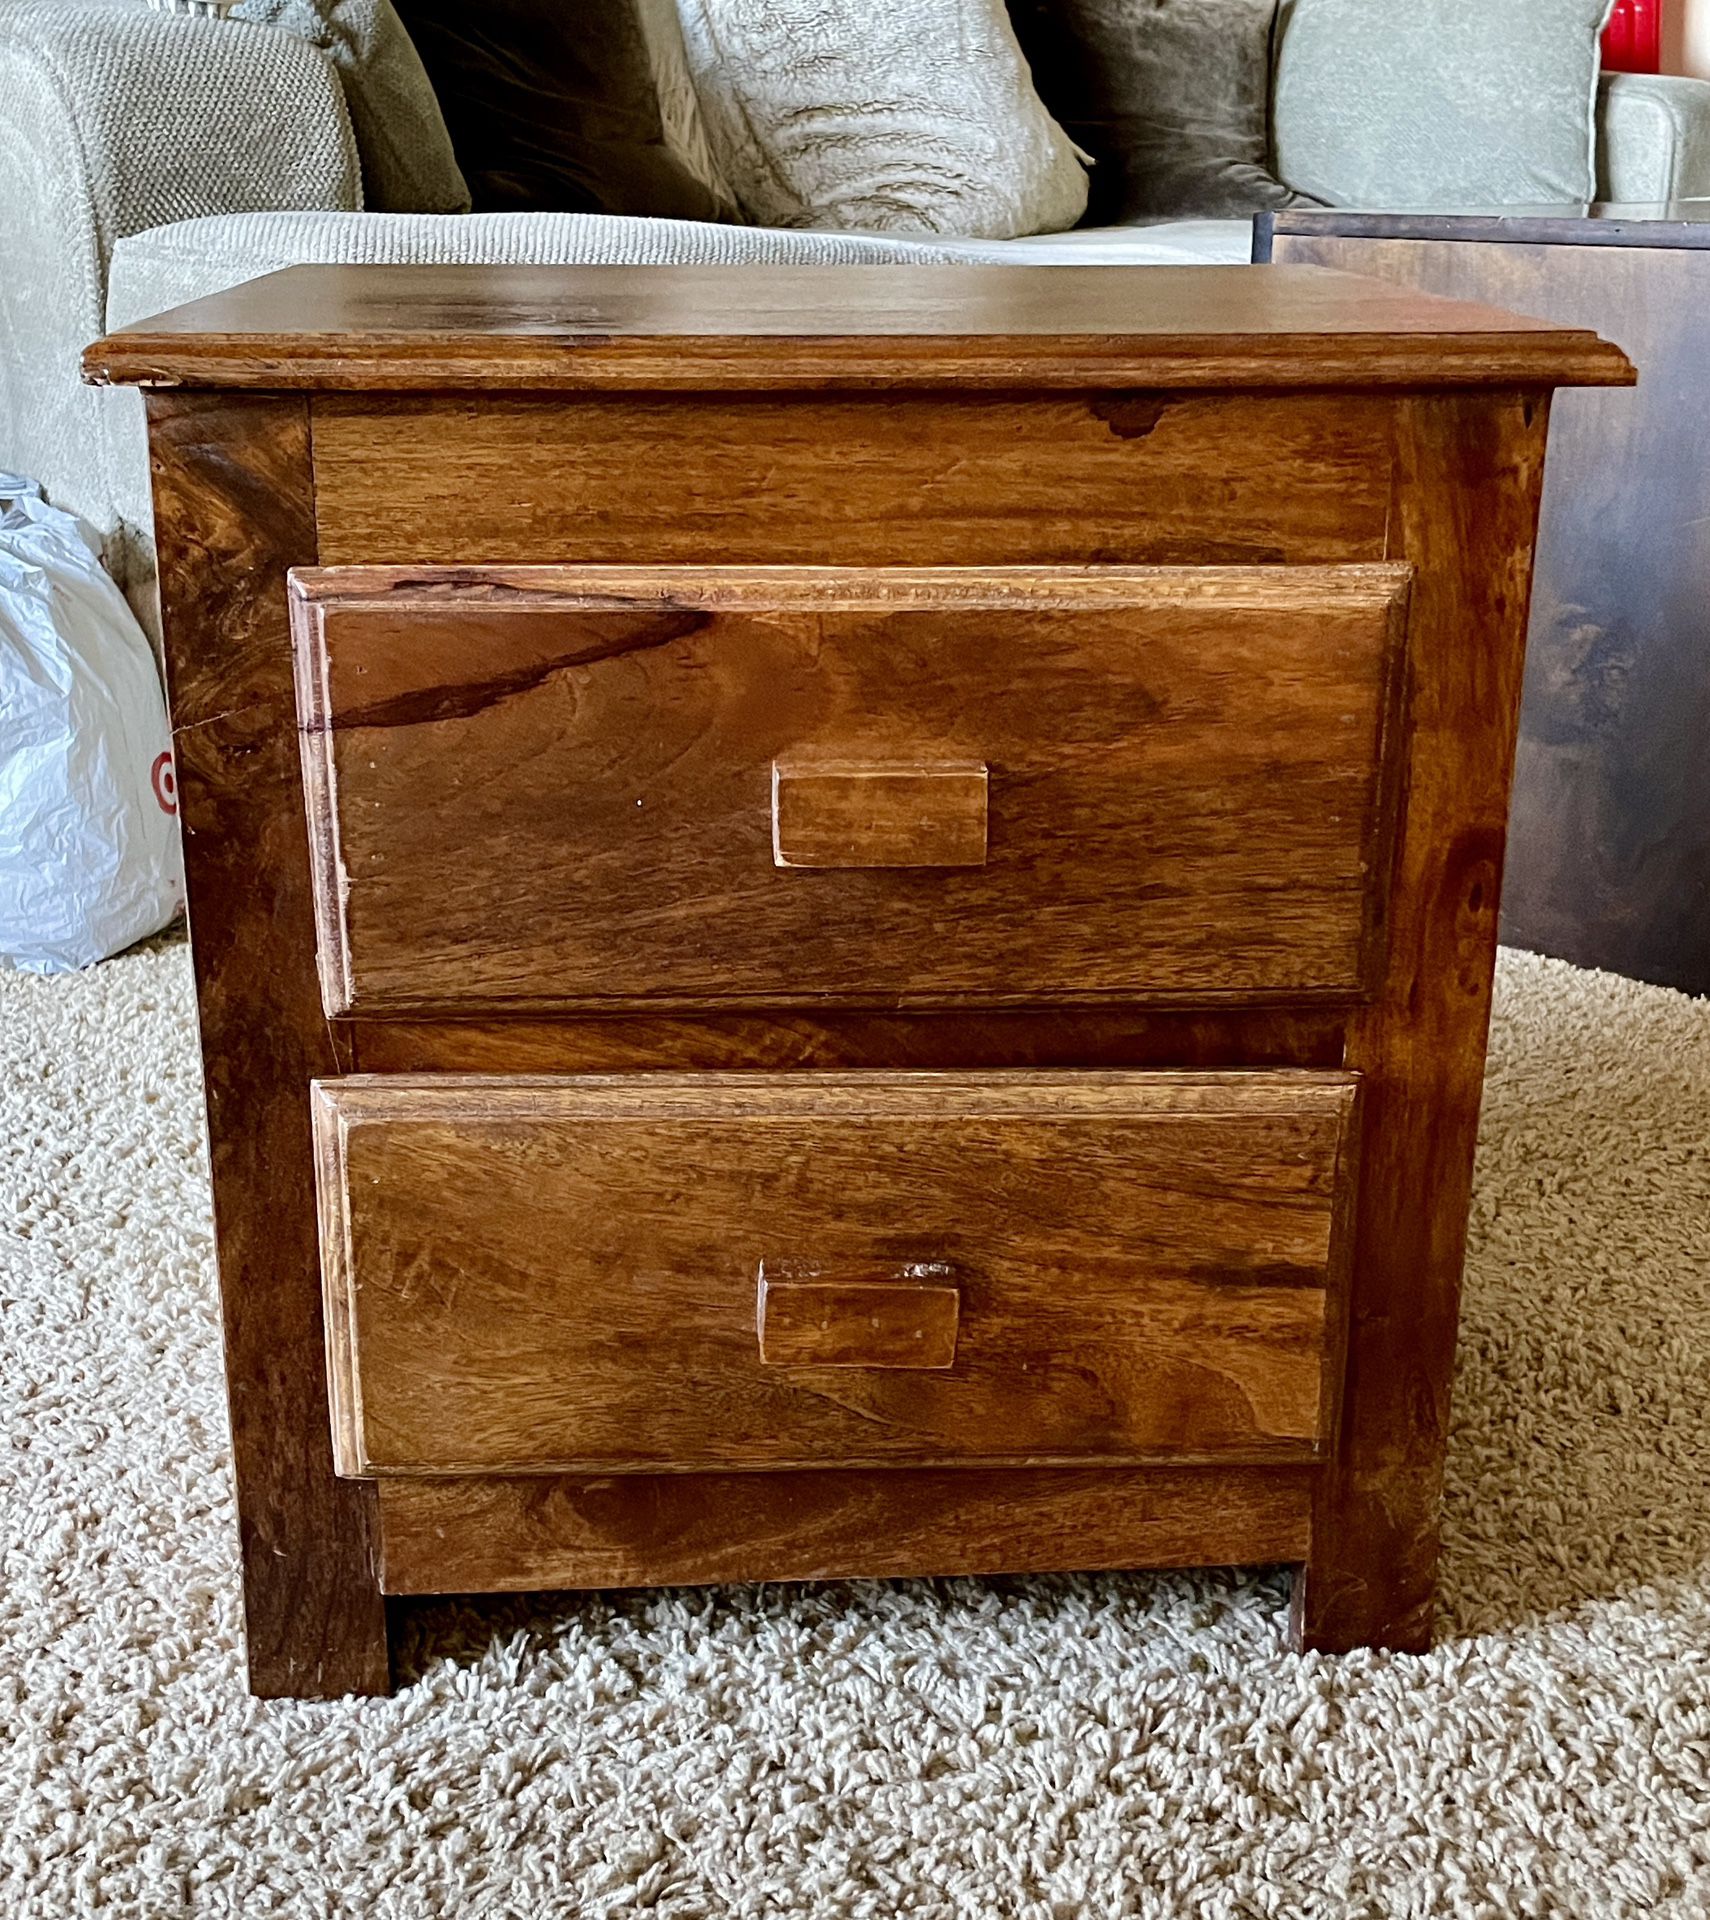 Solid Wood Night Stand End Table 